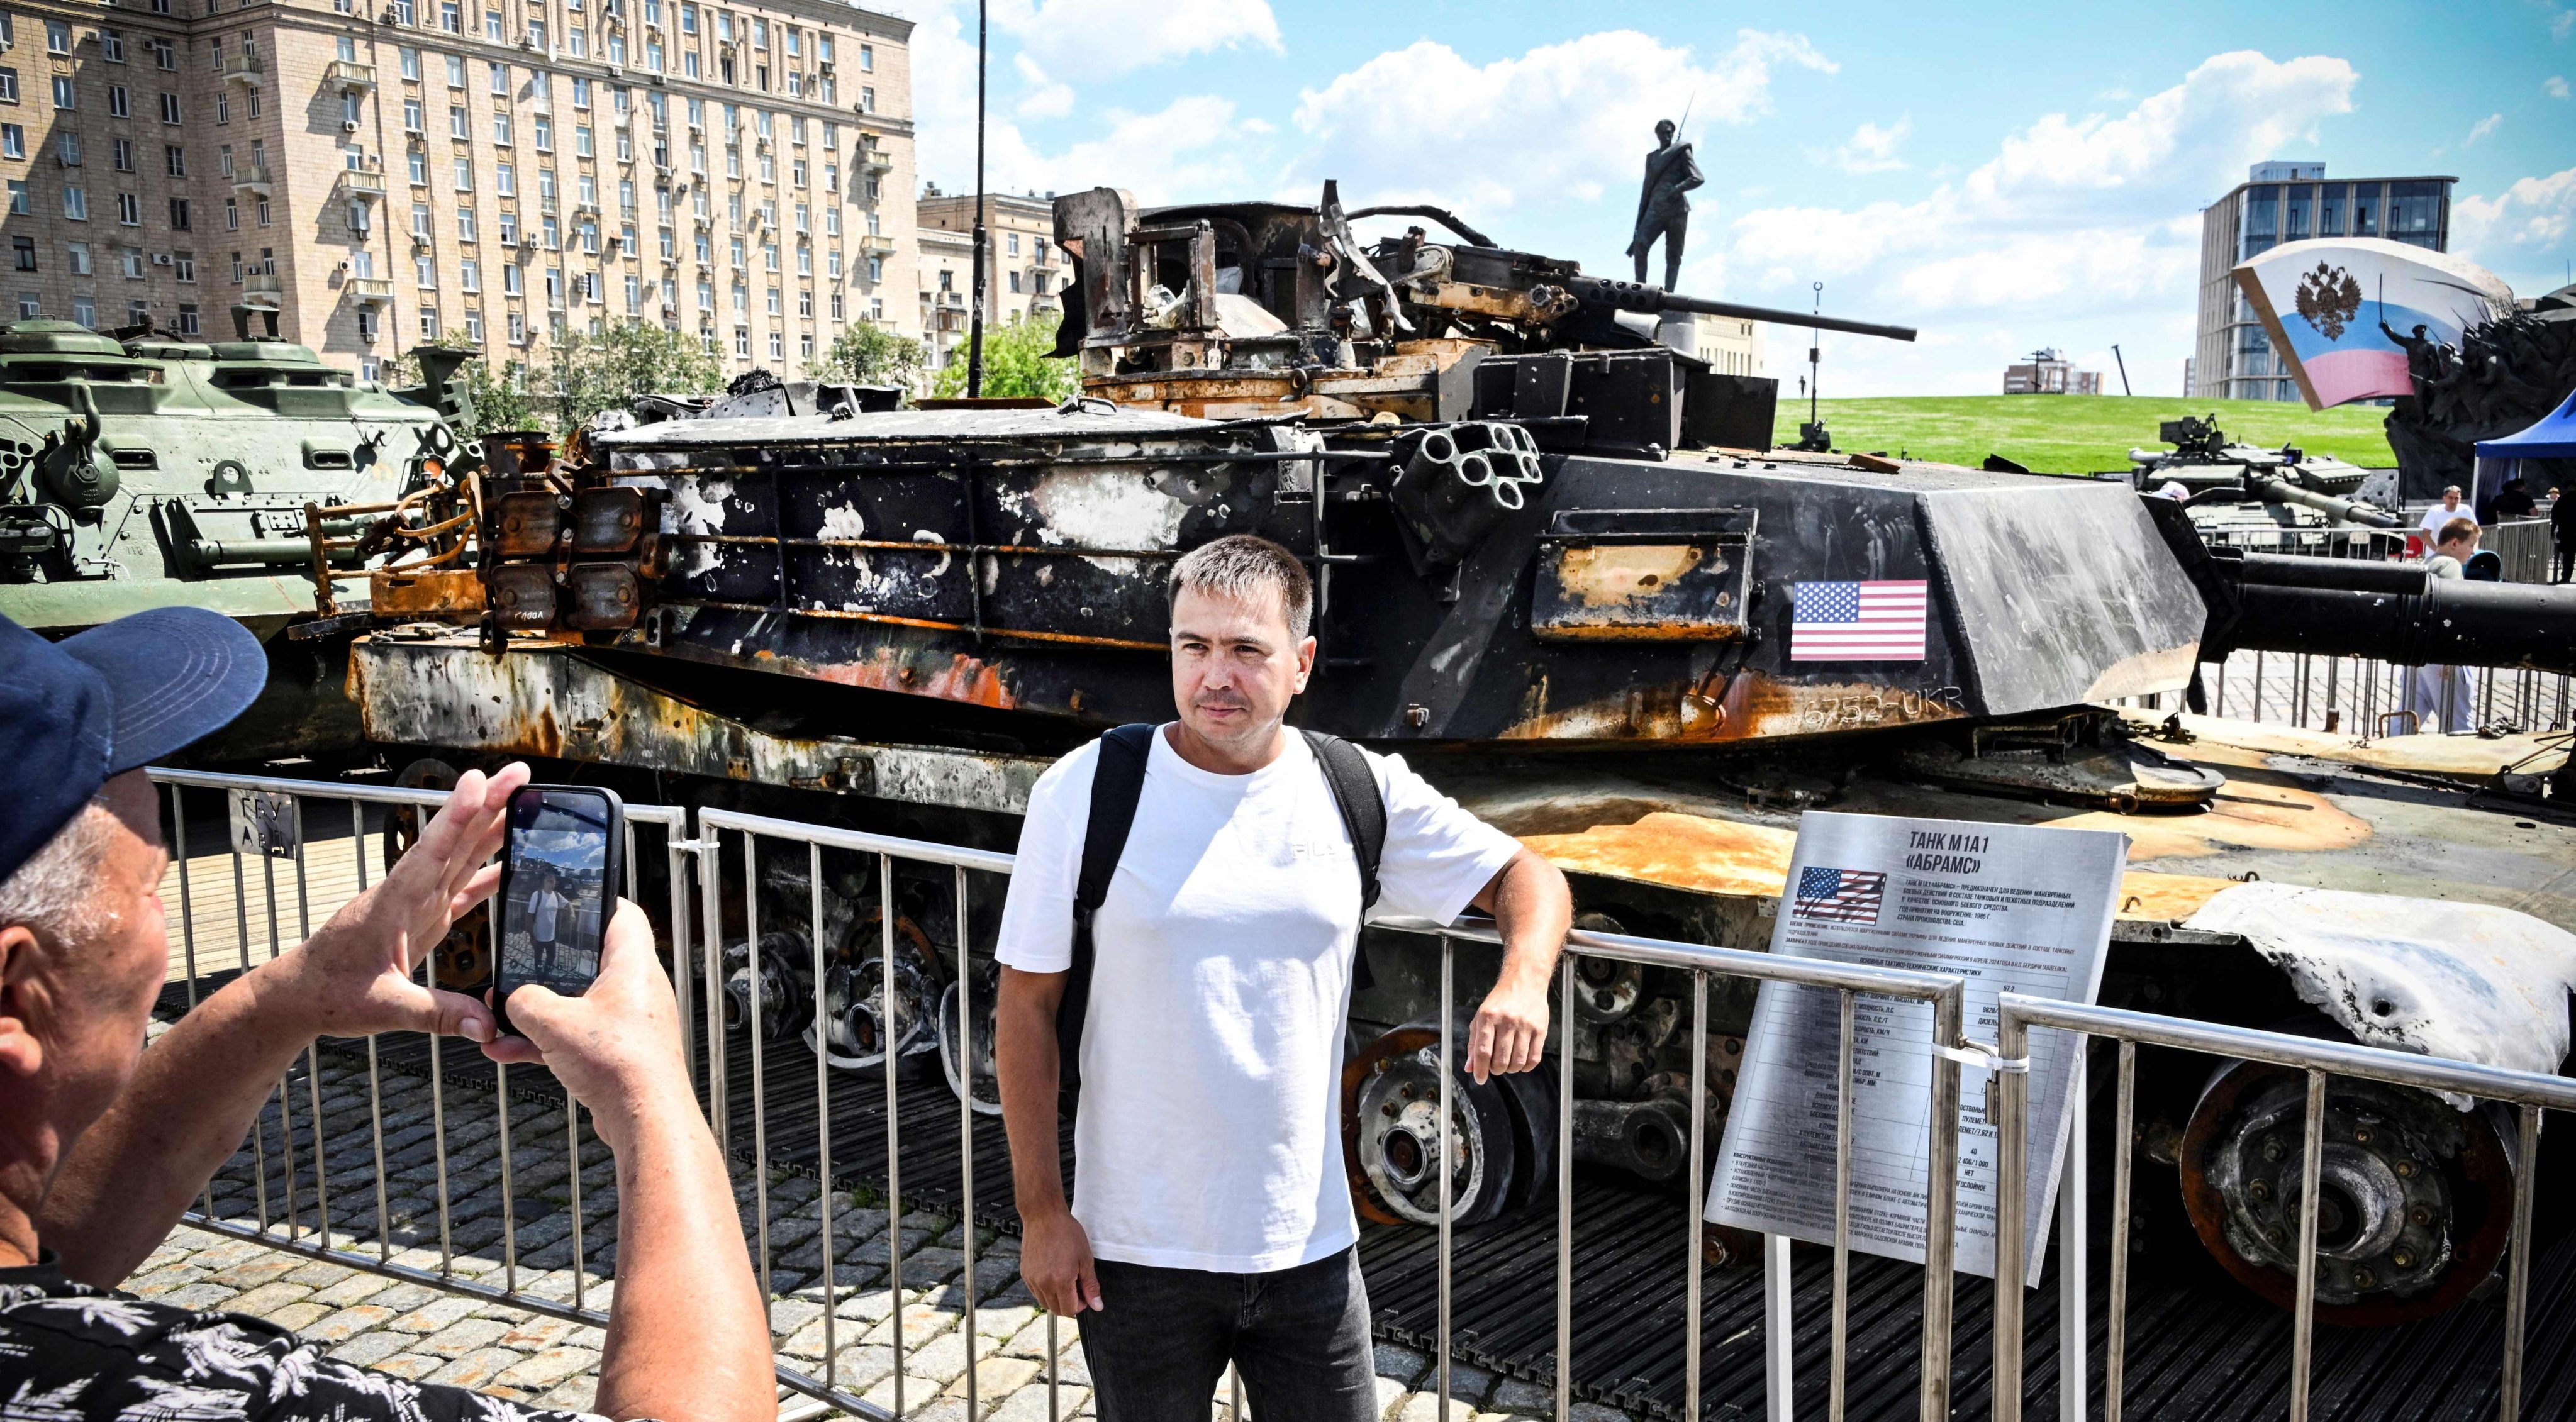 People pose in front of a US tank captured by Russian forces in Ukraine, displayed at a war memorial complex in western Moscow on June 27. Photo: AFP